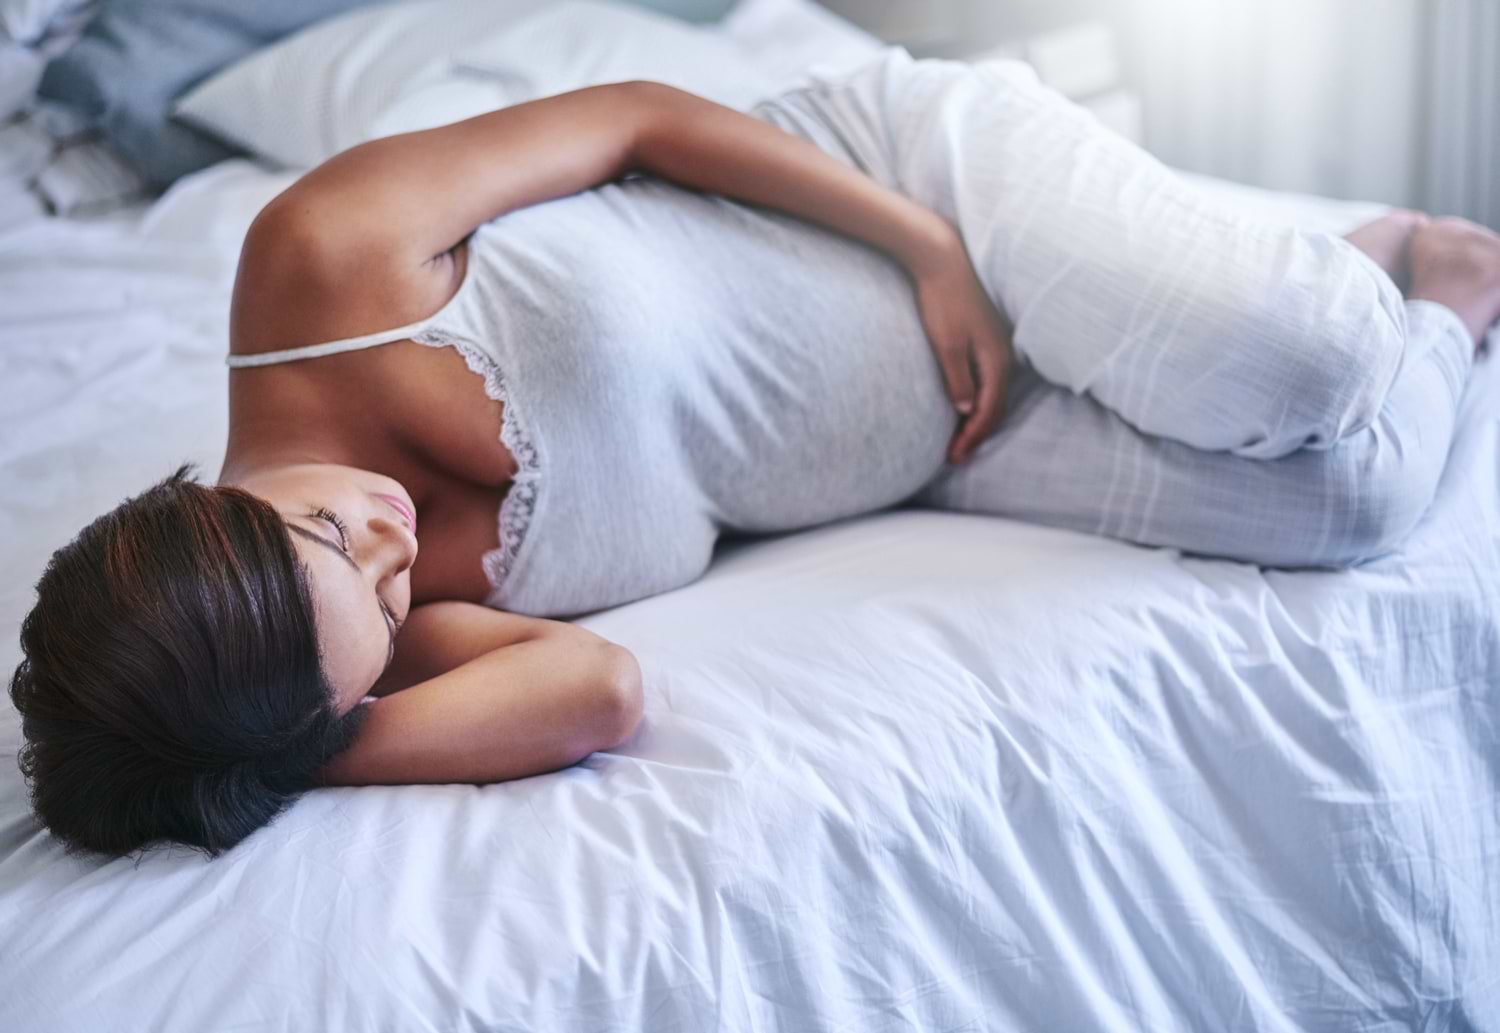 5-TIPS-FOR-GETTING-A-BETTER-SLEEP-AND-HAVING-RESTFUL-NIGHTS-DURING-PREGNANCY